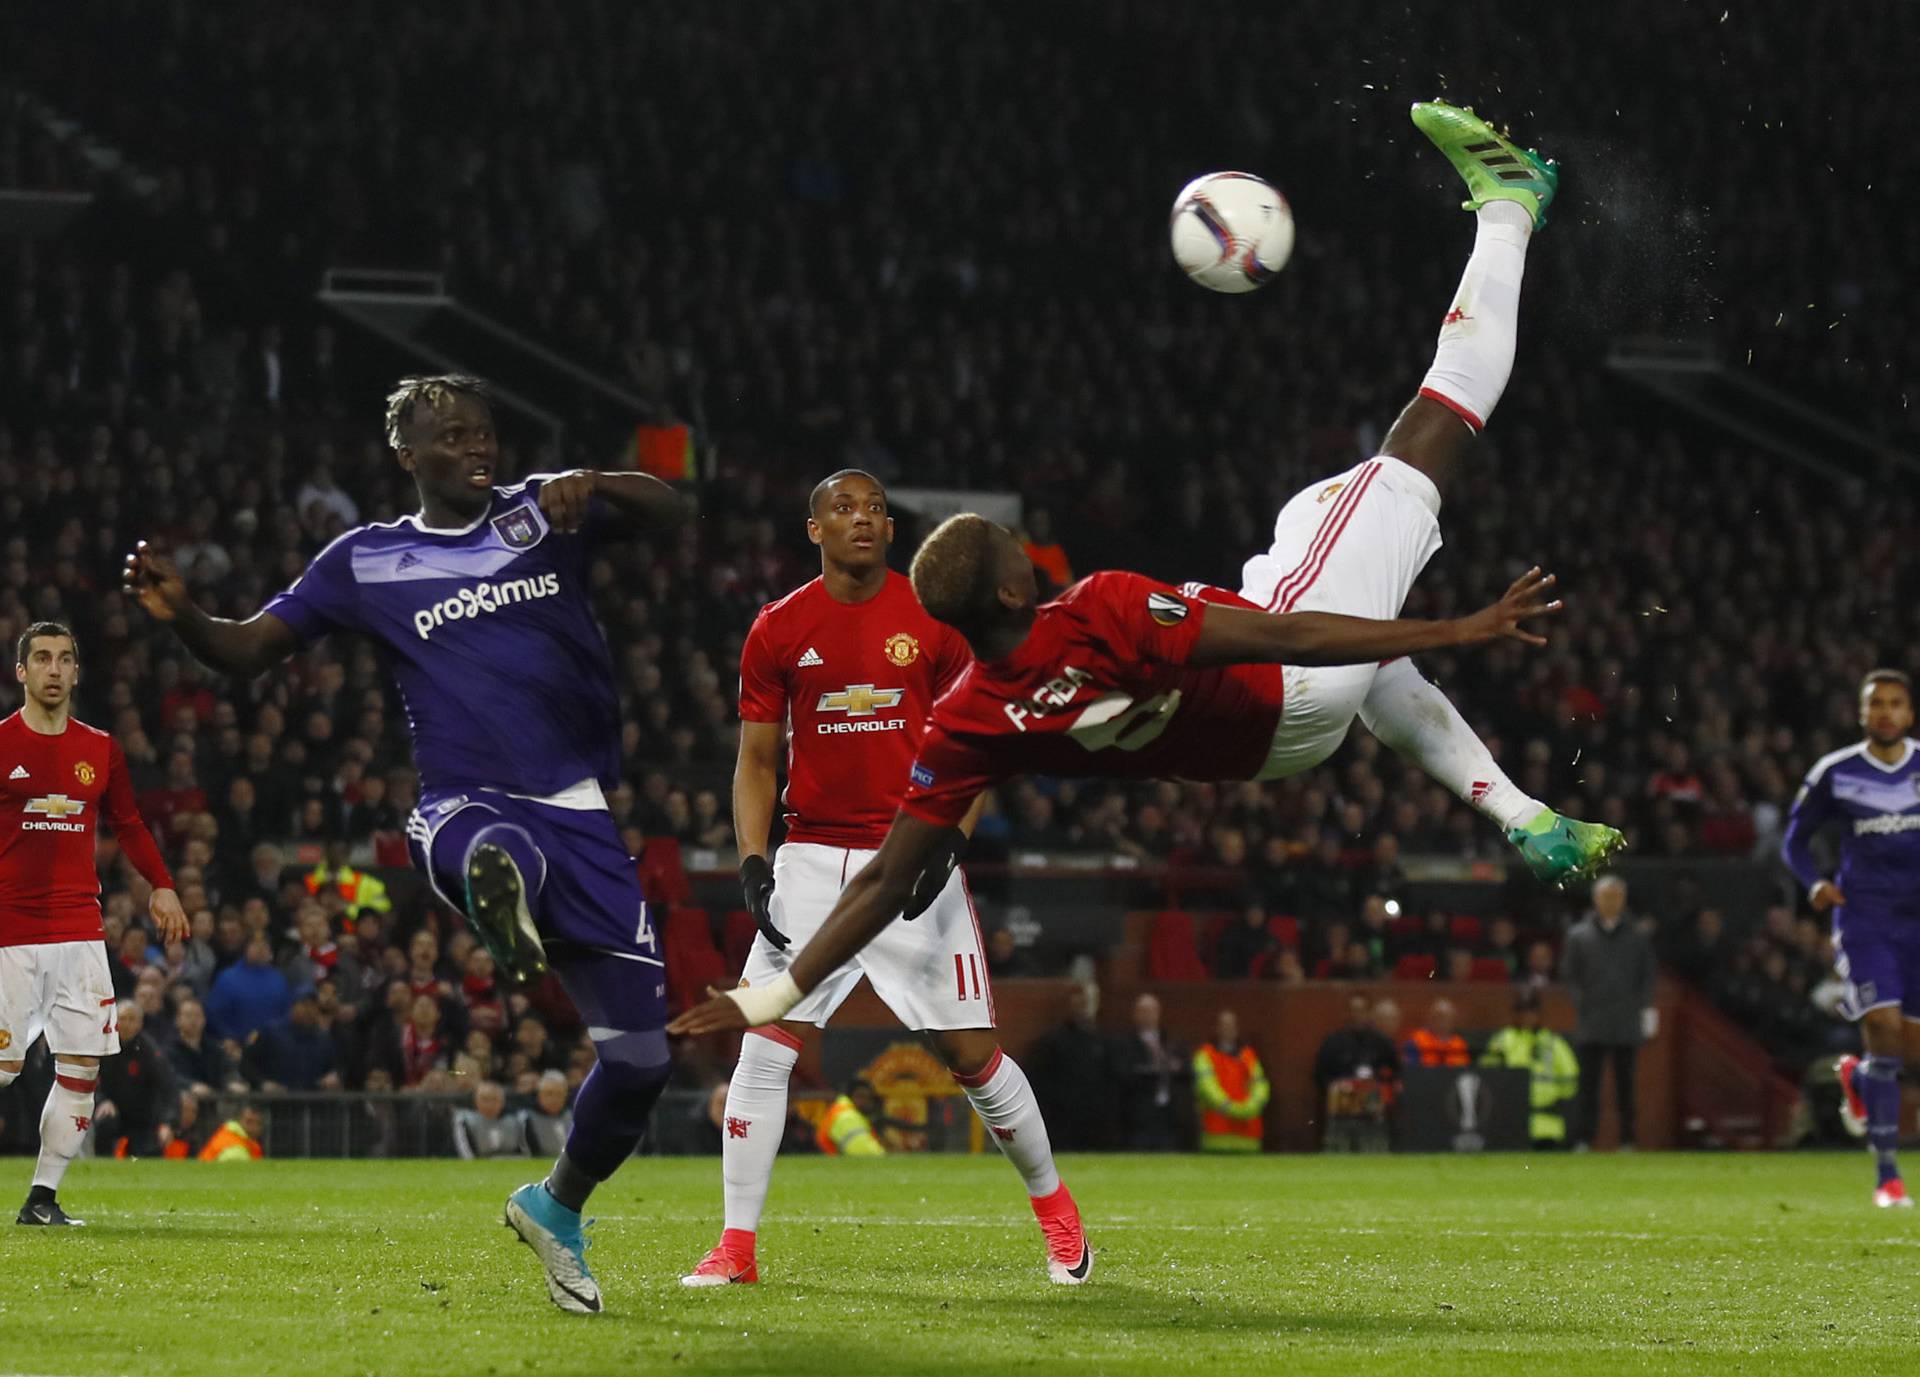 Manchester United's Paul Pogba attempts an overhead kick